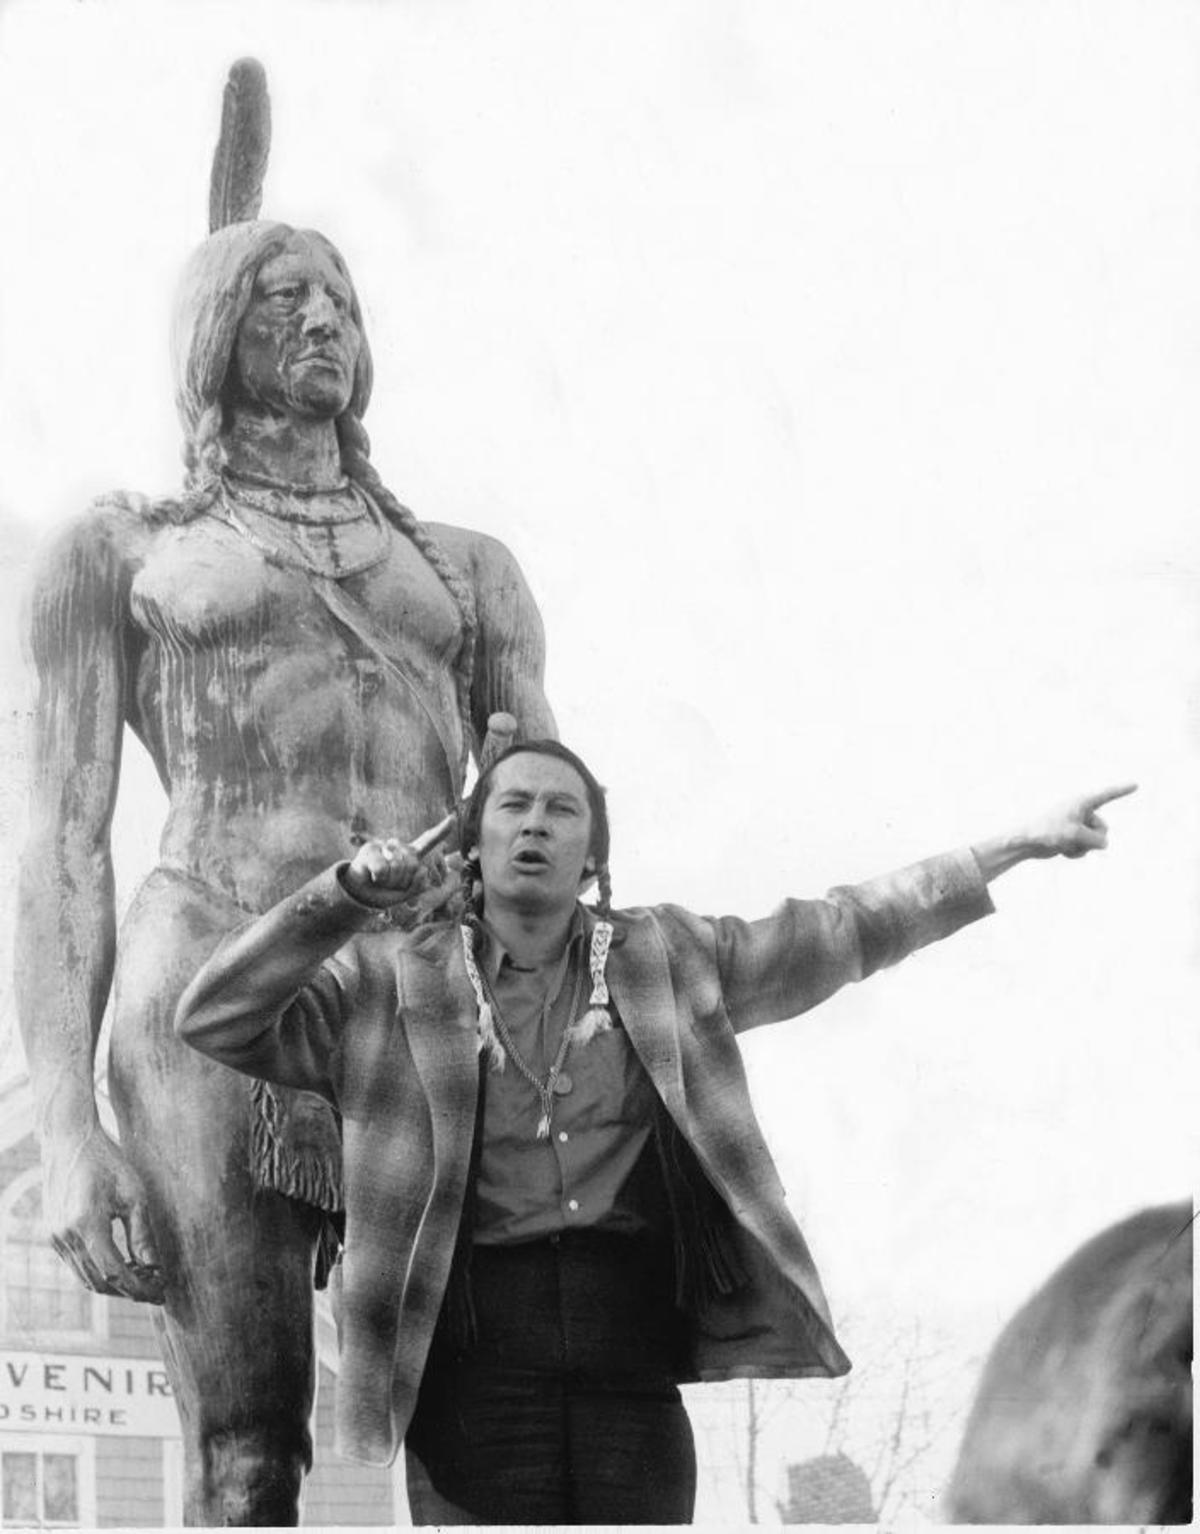 A black and white photograph of activist Russell Means giving a speech in front of the Massasoit statue in Plymouth, MA.